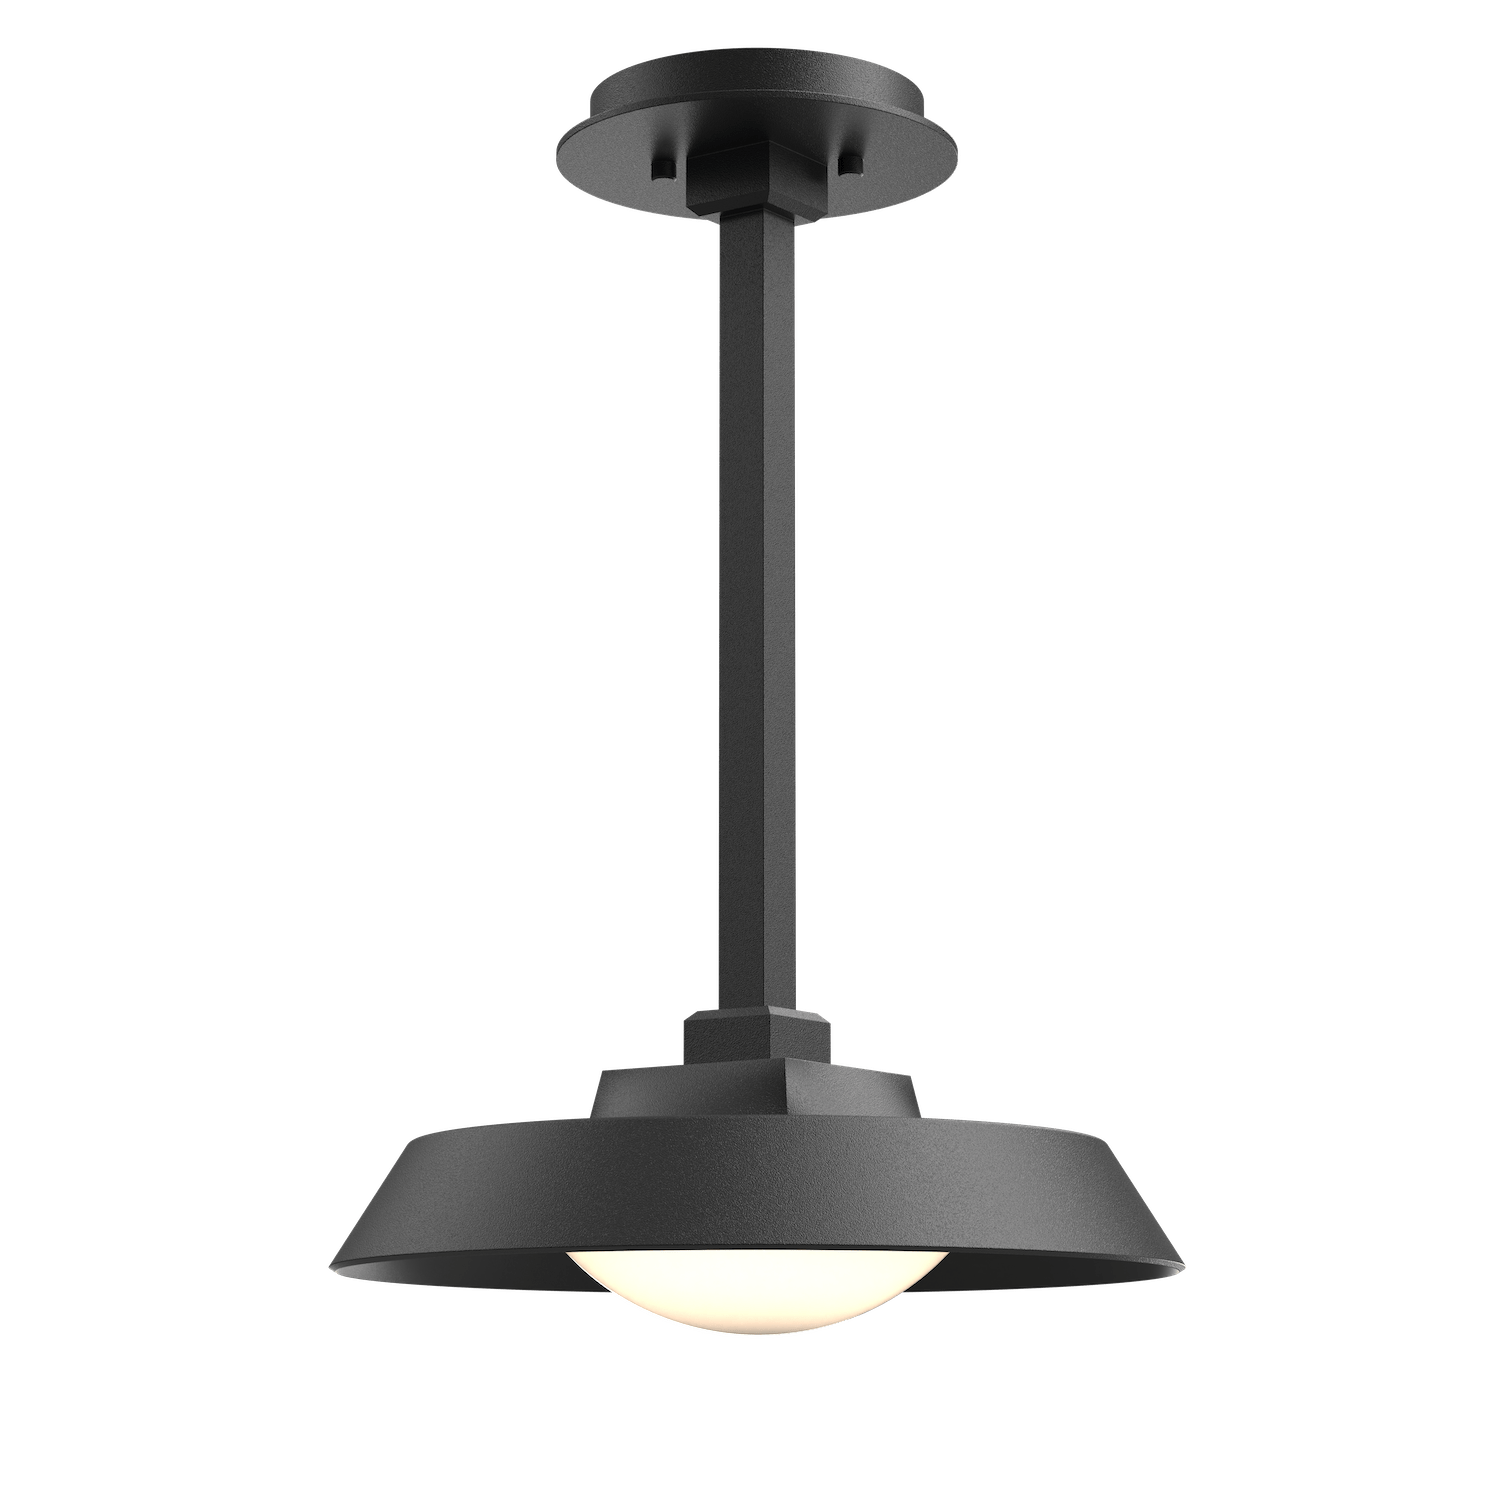 OPB0073-01-TB-O-Hammerton-Studio-Farmhouse-12-inch-outdoor-pendant-light-with-textured-black-finish-and-frosted-glass-shade-and-LED-lamping